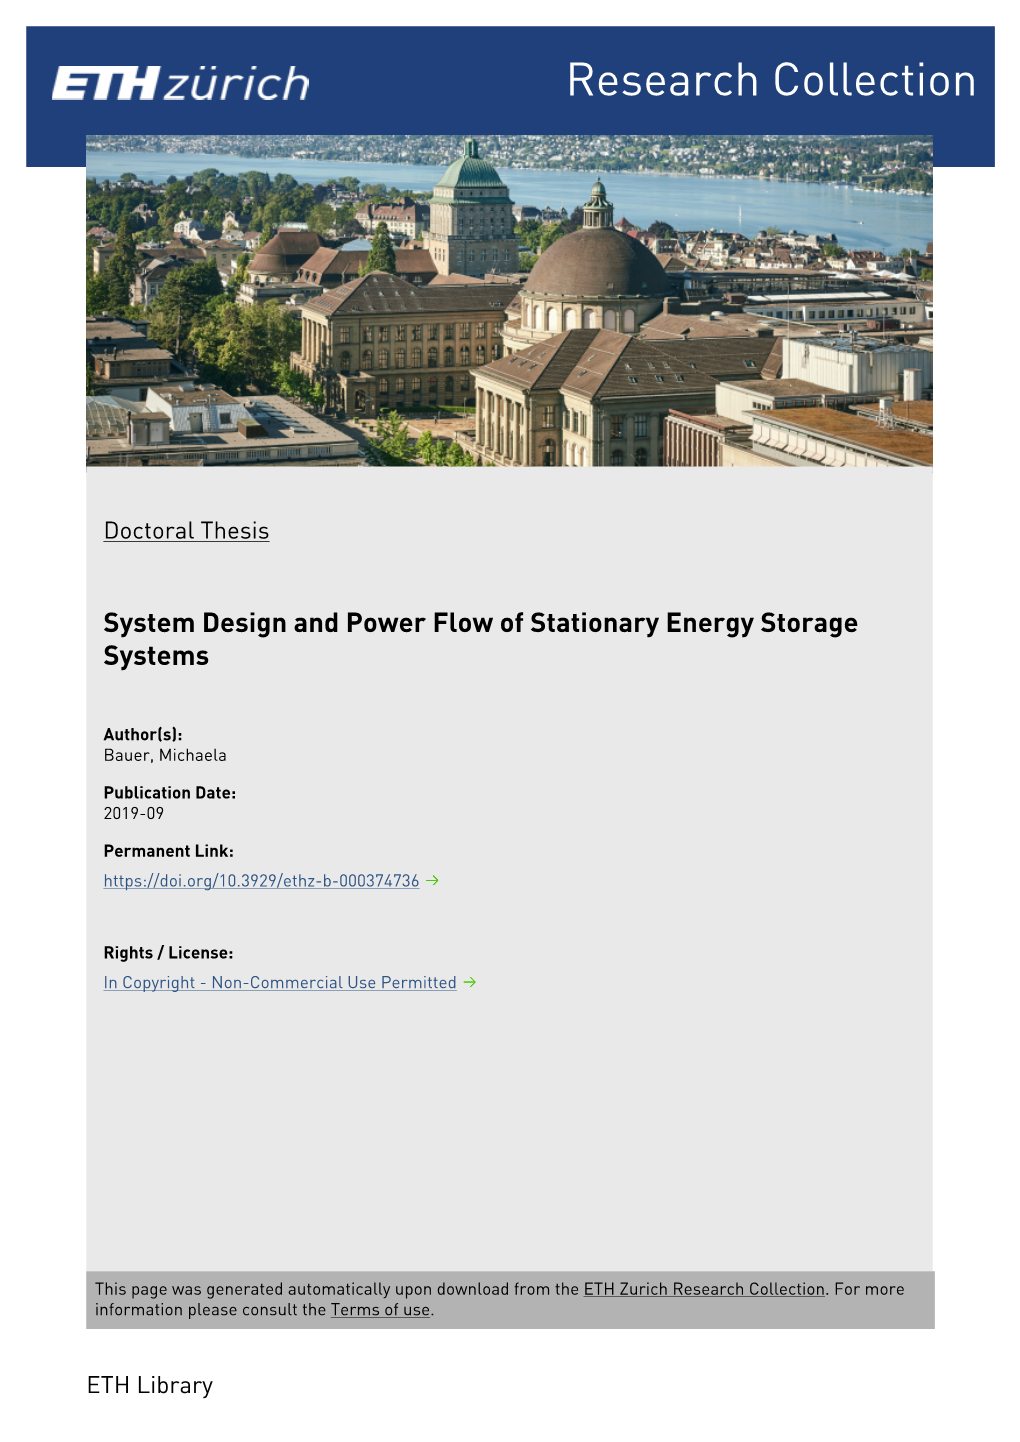 System Design and Power Flow of Stationary Energy Storage Systems